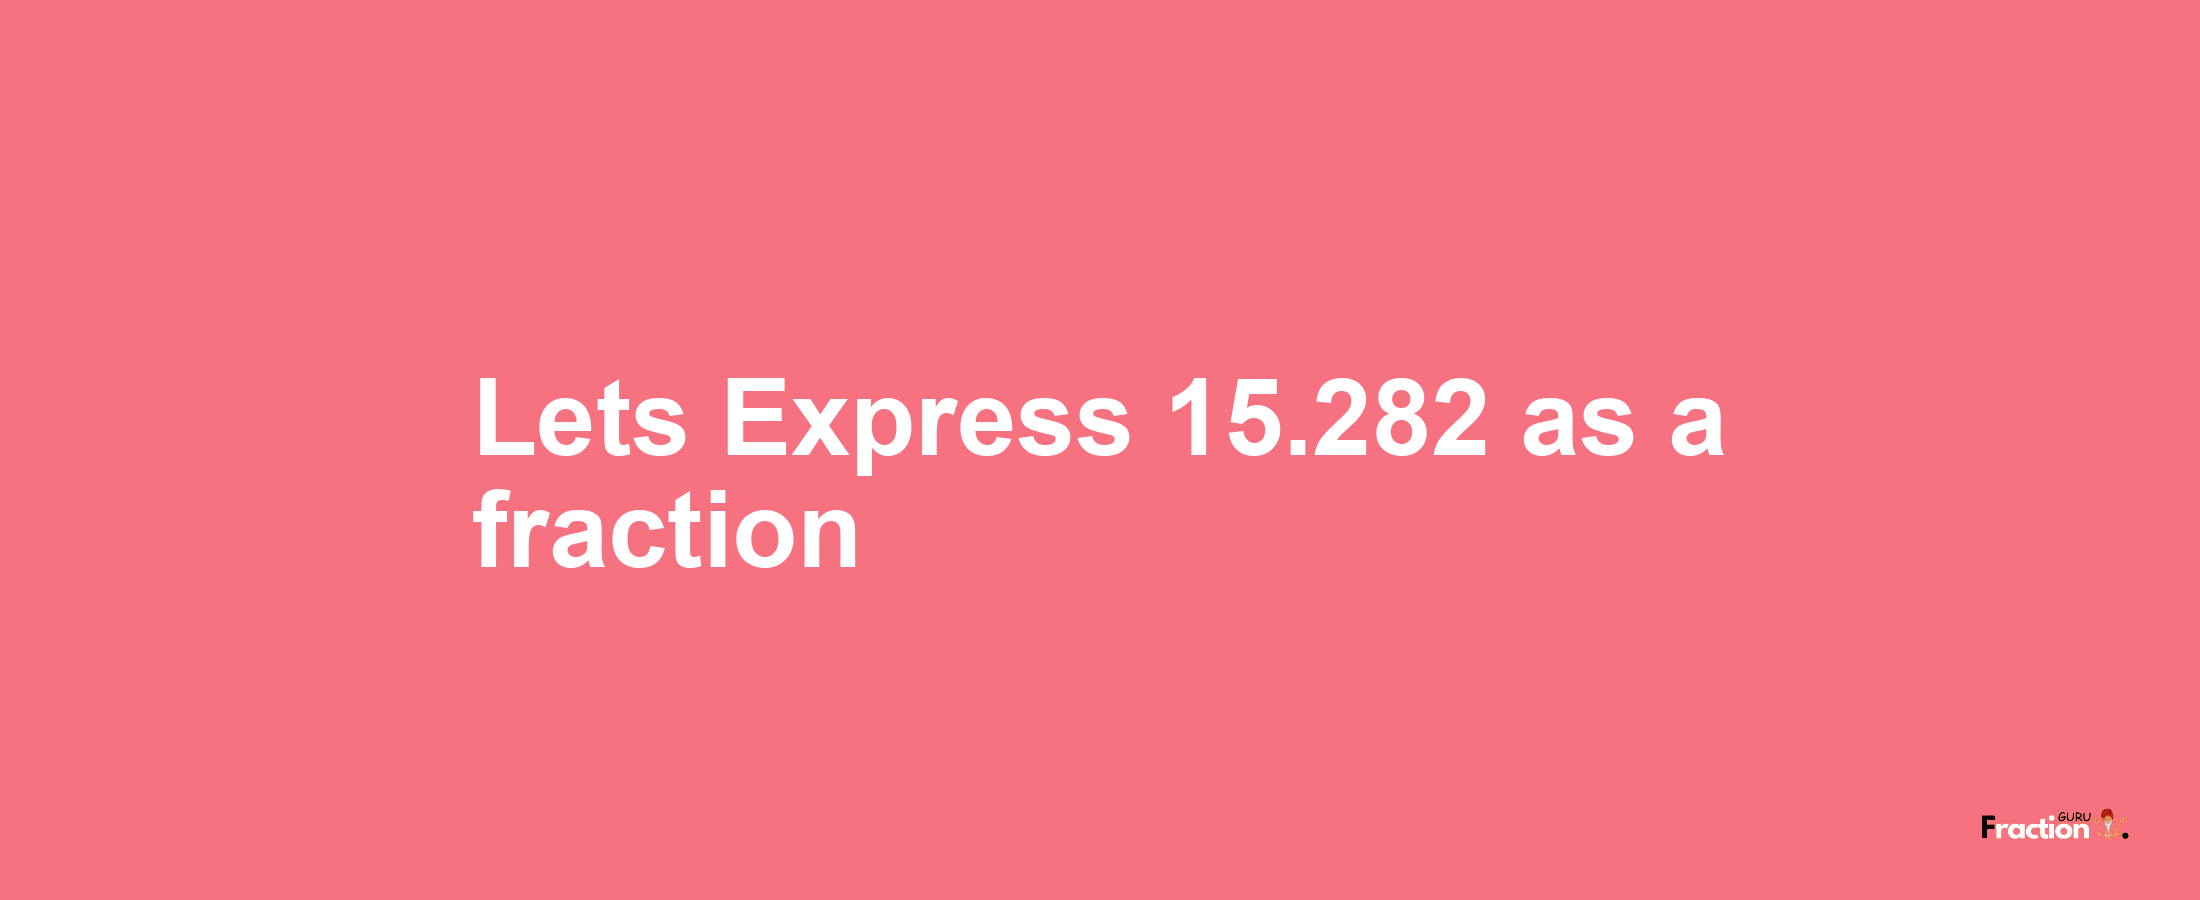 Lets Express 15.282 as afraction